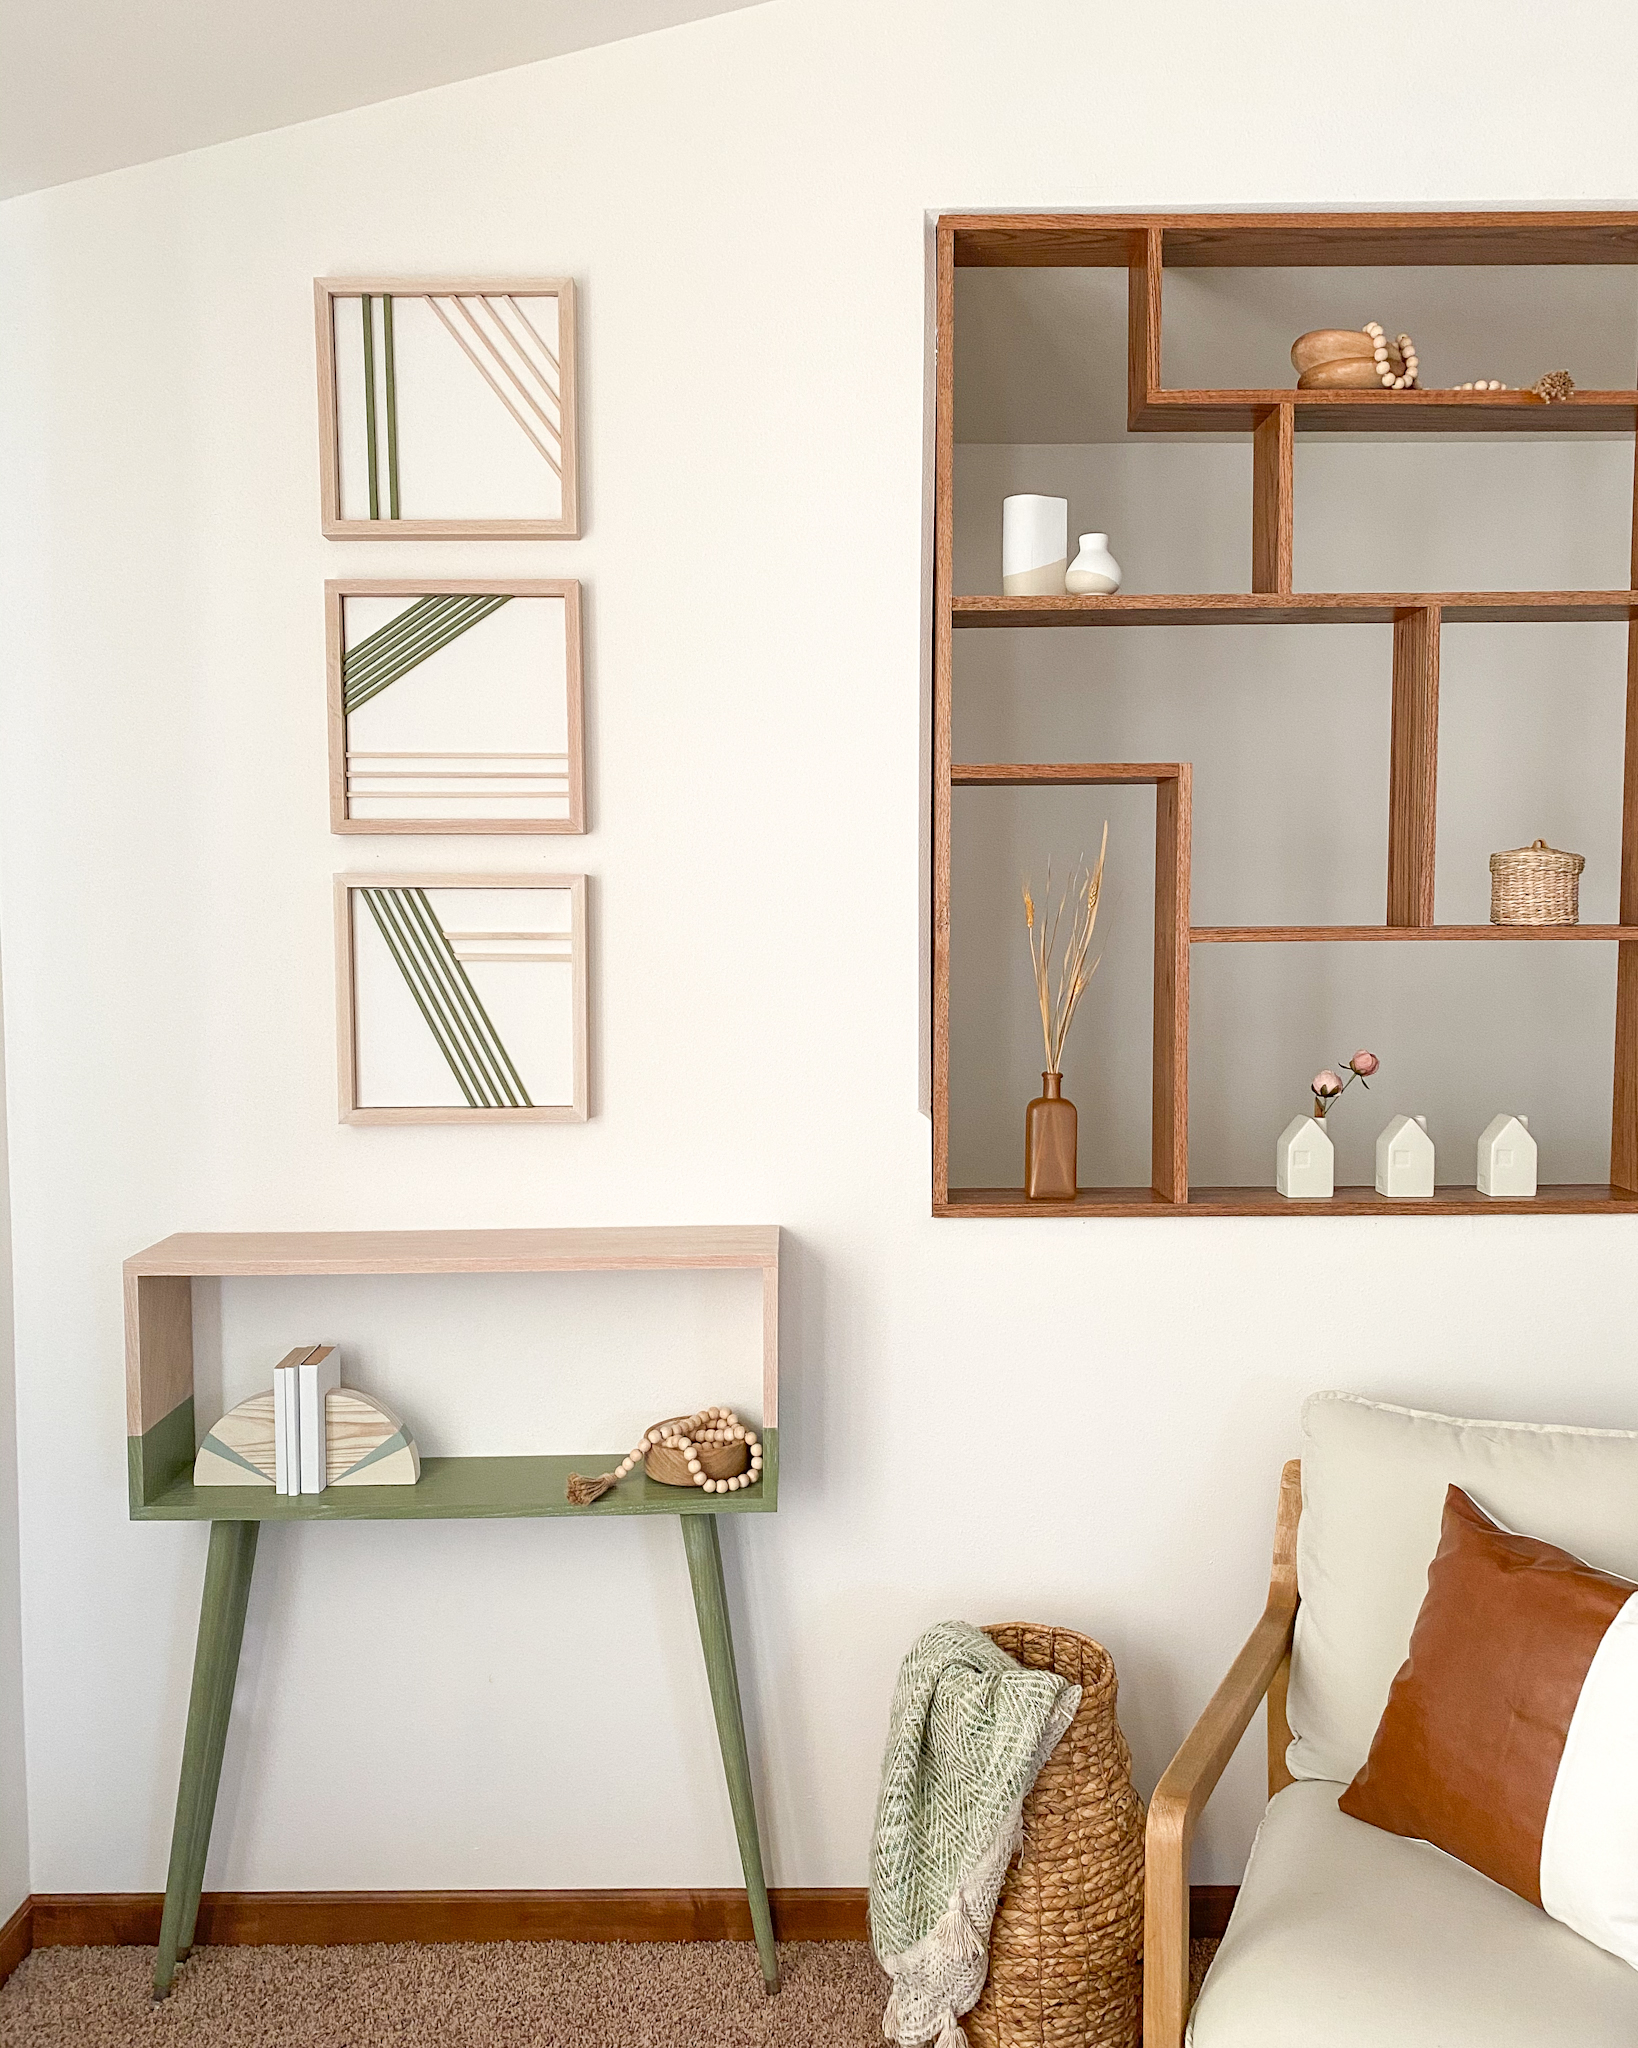 How to Make Modern Wall Art with Wood Dowels - The Handcrafted Haven